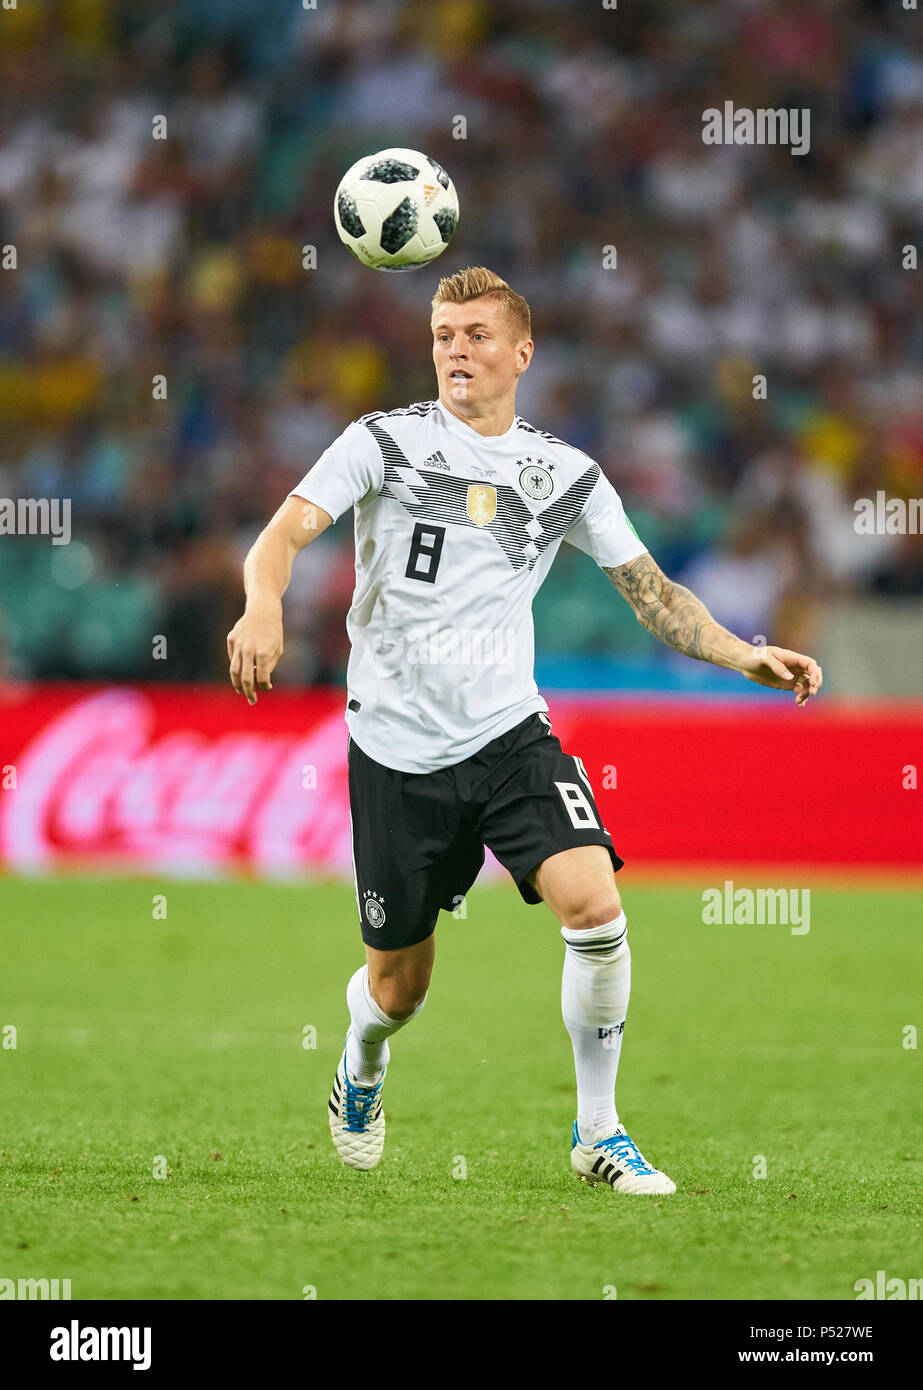 Germany - Sweden, Soccer, Sochi, June 23, 2018 Toni KROOS, DFB 8  GERMANY - SWEDEN 2-1 FIFA WORLD CUP 2018 RUSSIA, Group F, Season 2018/2019,  June 23, 2018  Fisht Olympic Stadium in Sotchi, Russia.  © Peter Schatz / Alamy Live News Stock Photo